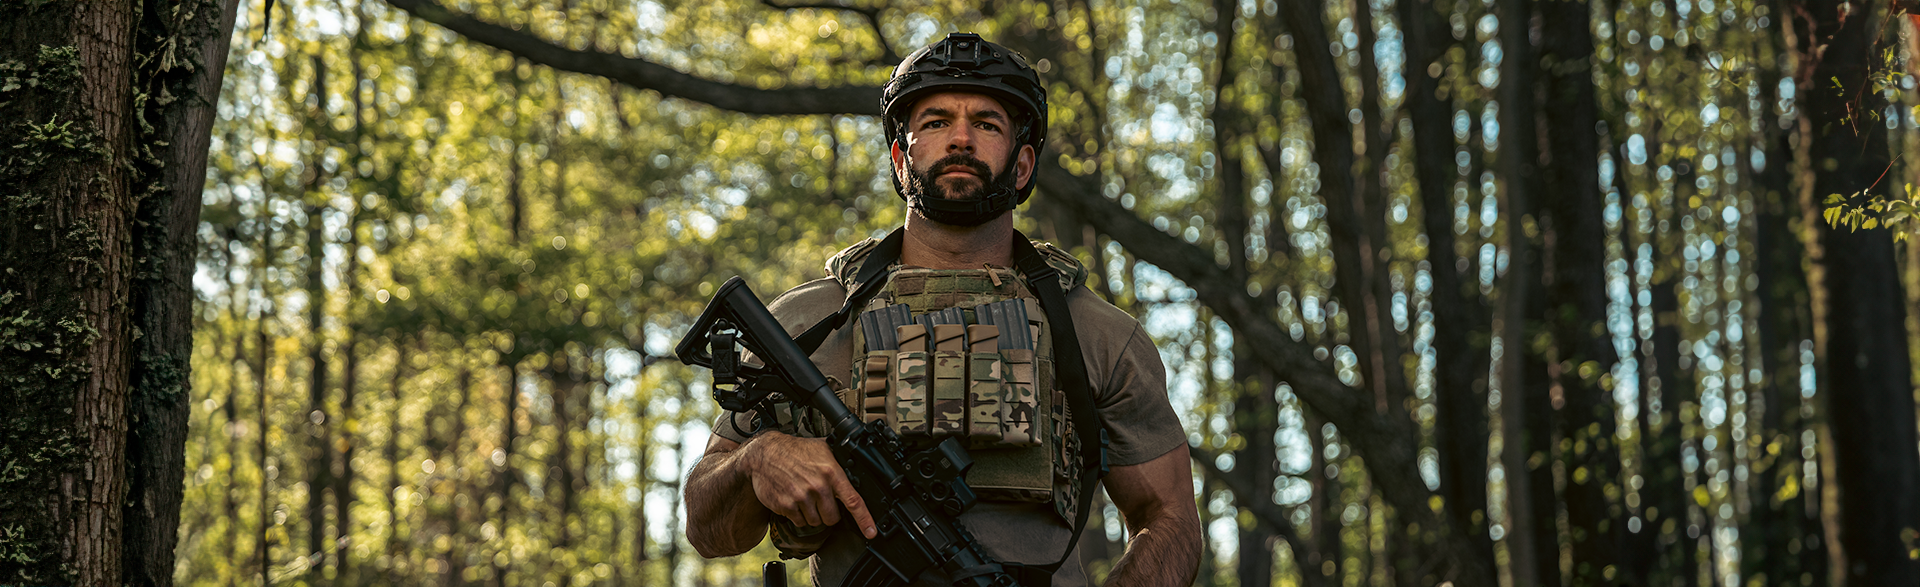 OPSEC ADVANCED QUICK RELEASE PLATE CARRIER